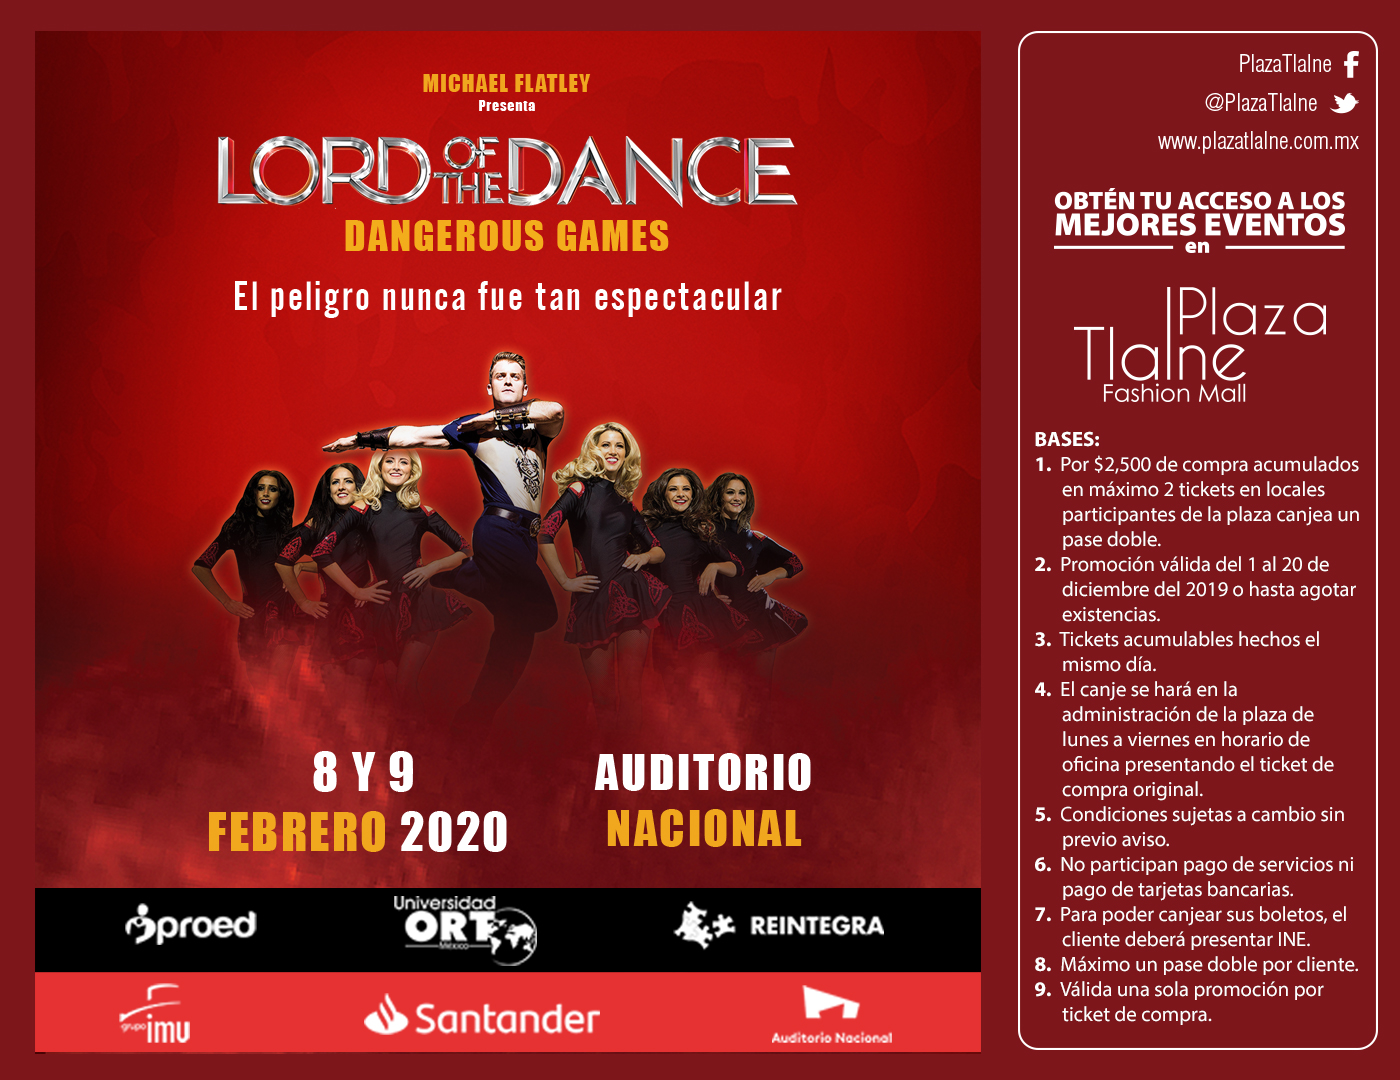 LORD OF THE DANCE